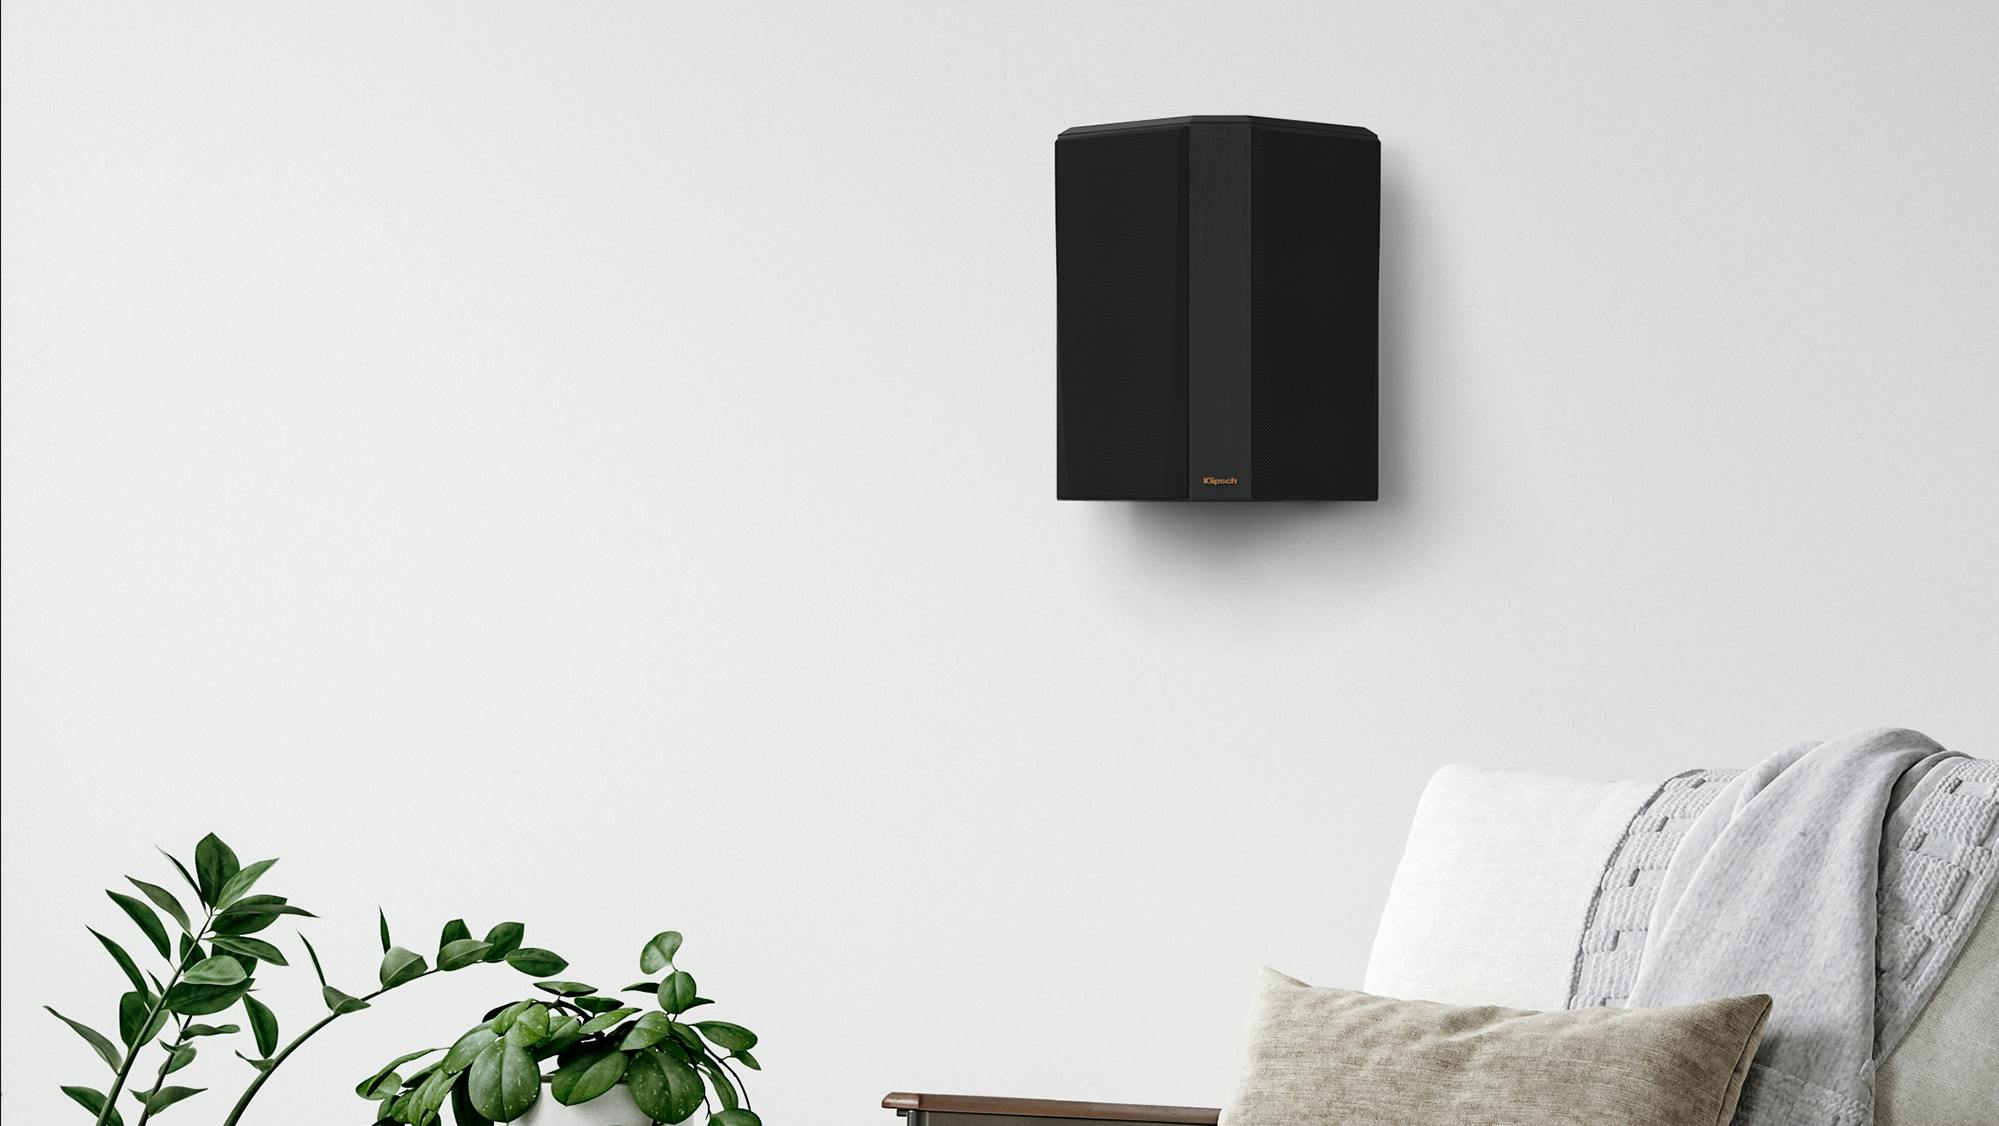 RP 502 S II surround speaker in black finish hung on a greyish wall